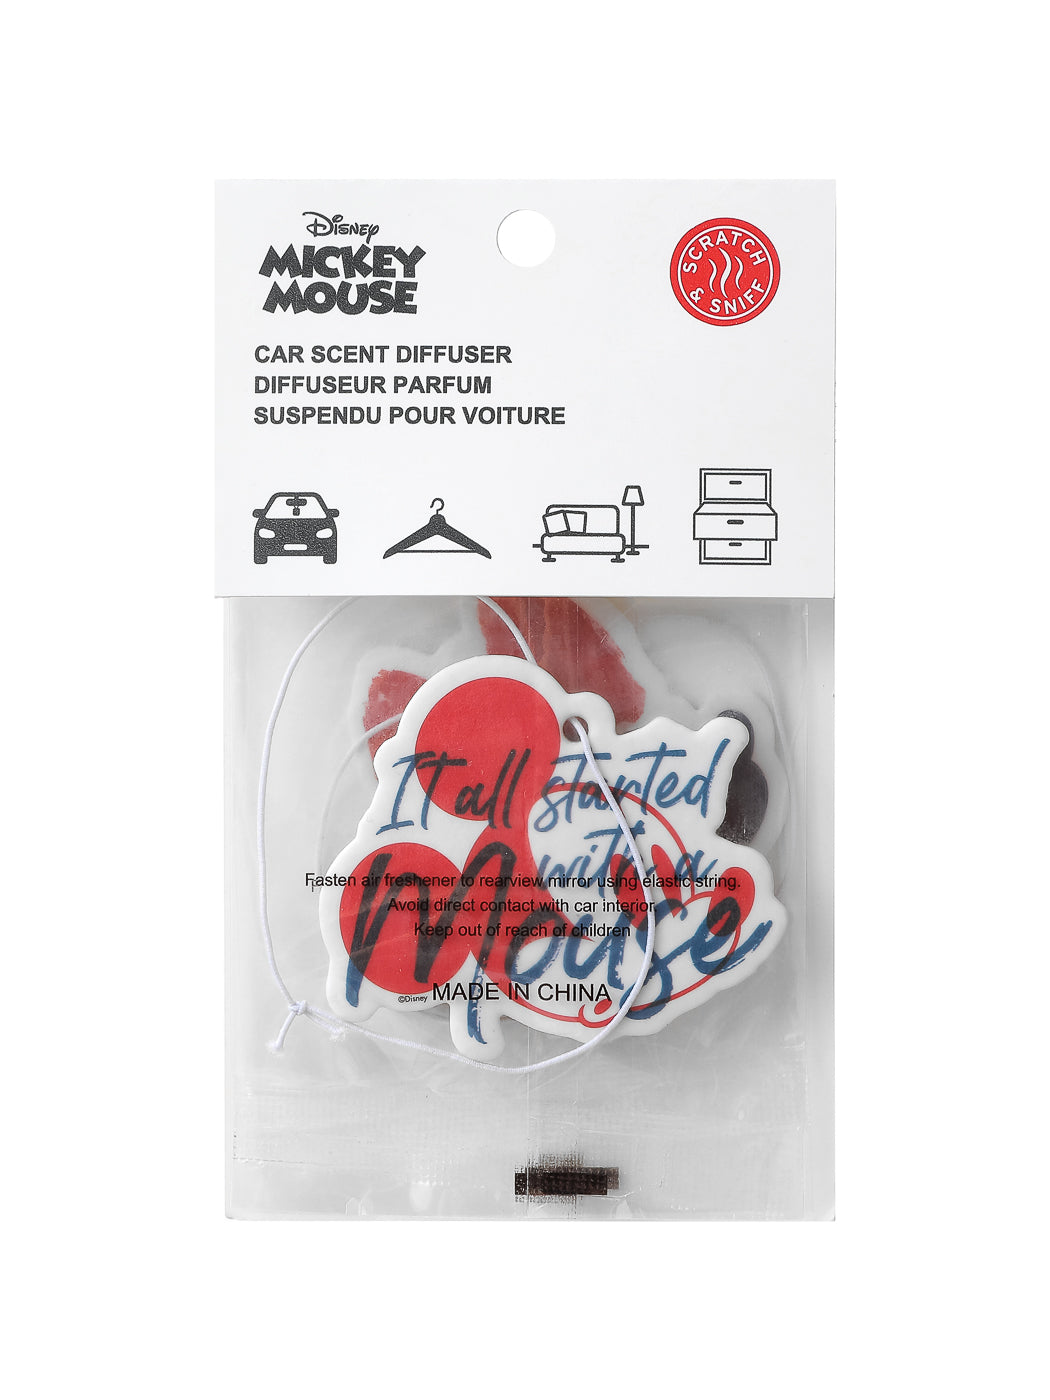 MINISO MICKEY MOUSE COLLECTION 2.0 HANGING CAR SCENT DIFFUSER-2PCS(ROSE) 2010516910104 SCENT DIFFUSER